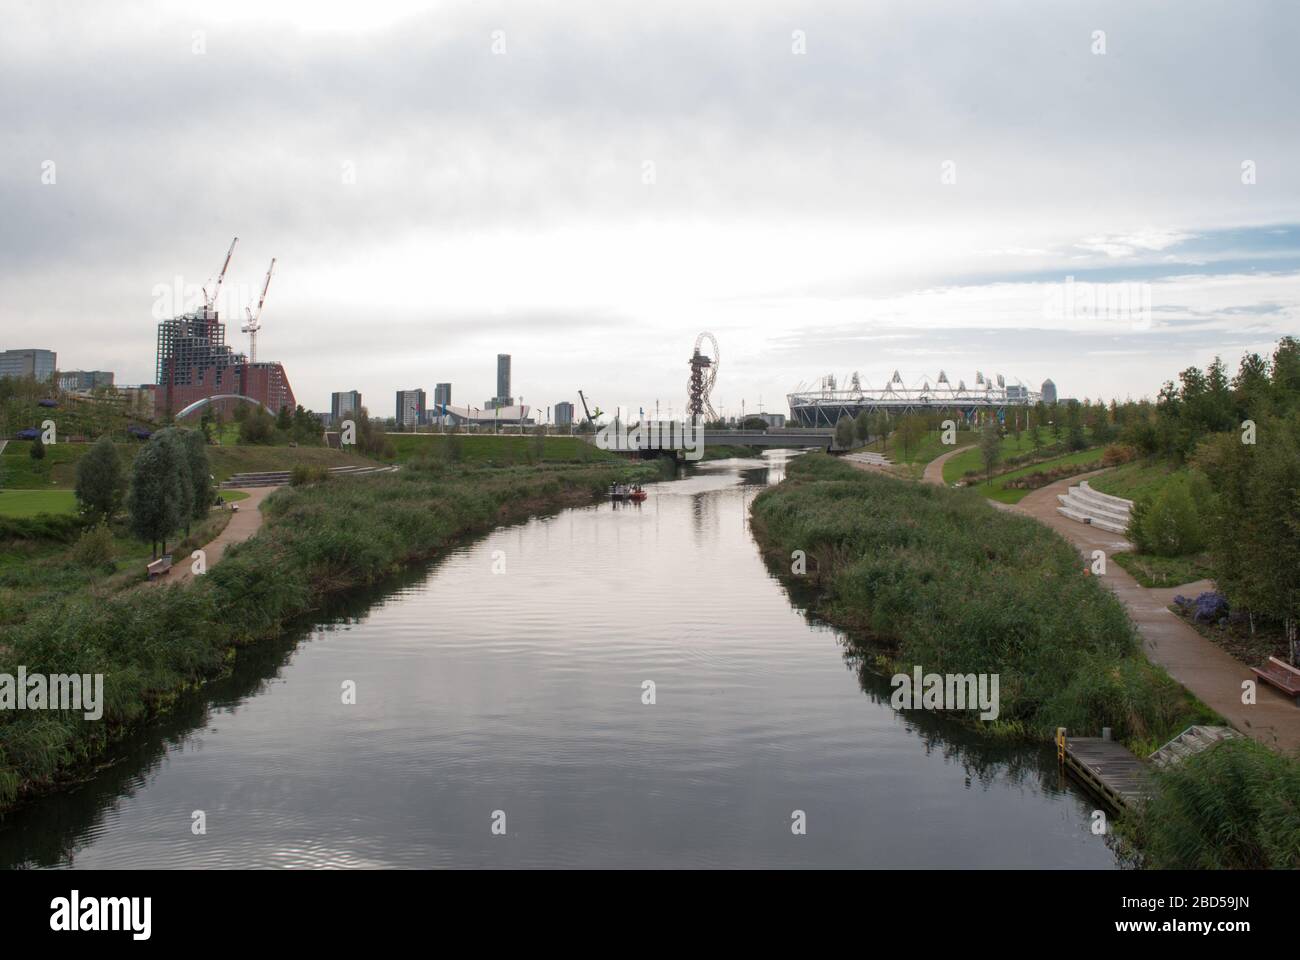 Landscape Architecture London 2012 Olympics Queen Elizabeth Olympic Park, Stratford, London, E20 2AD by Hargreaves Associates LDA Design Stock Photo